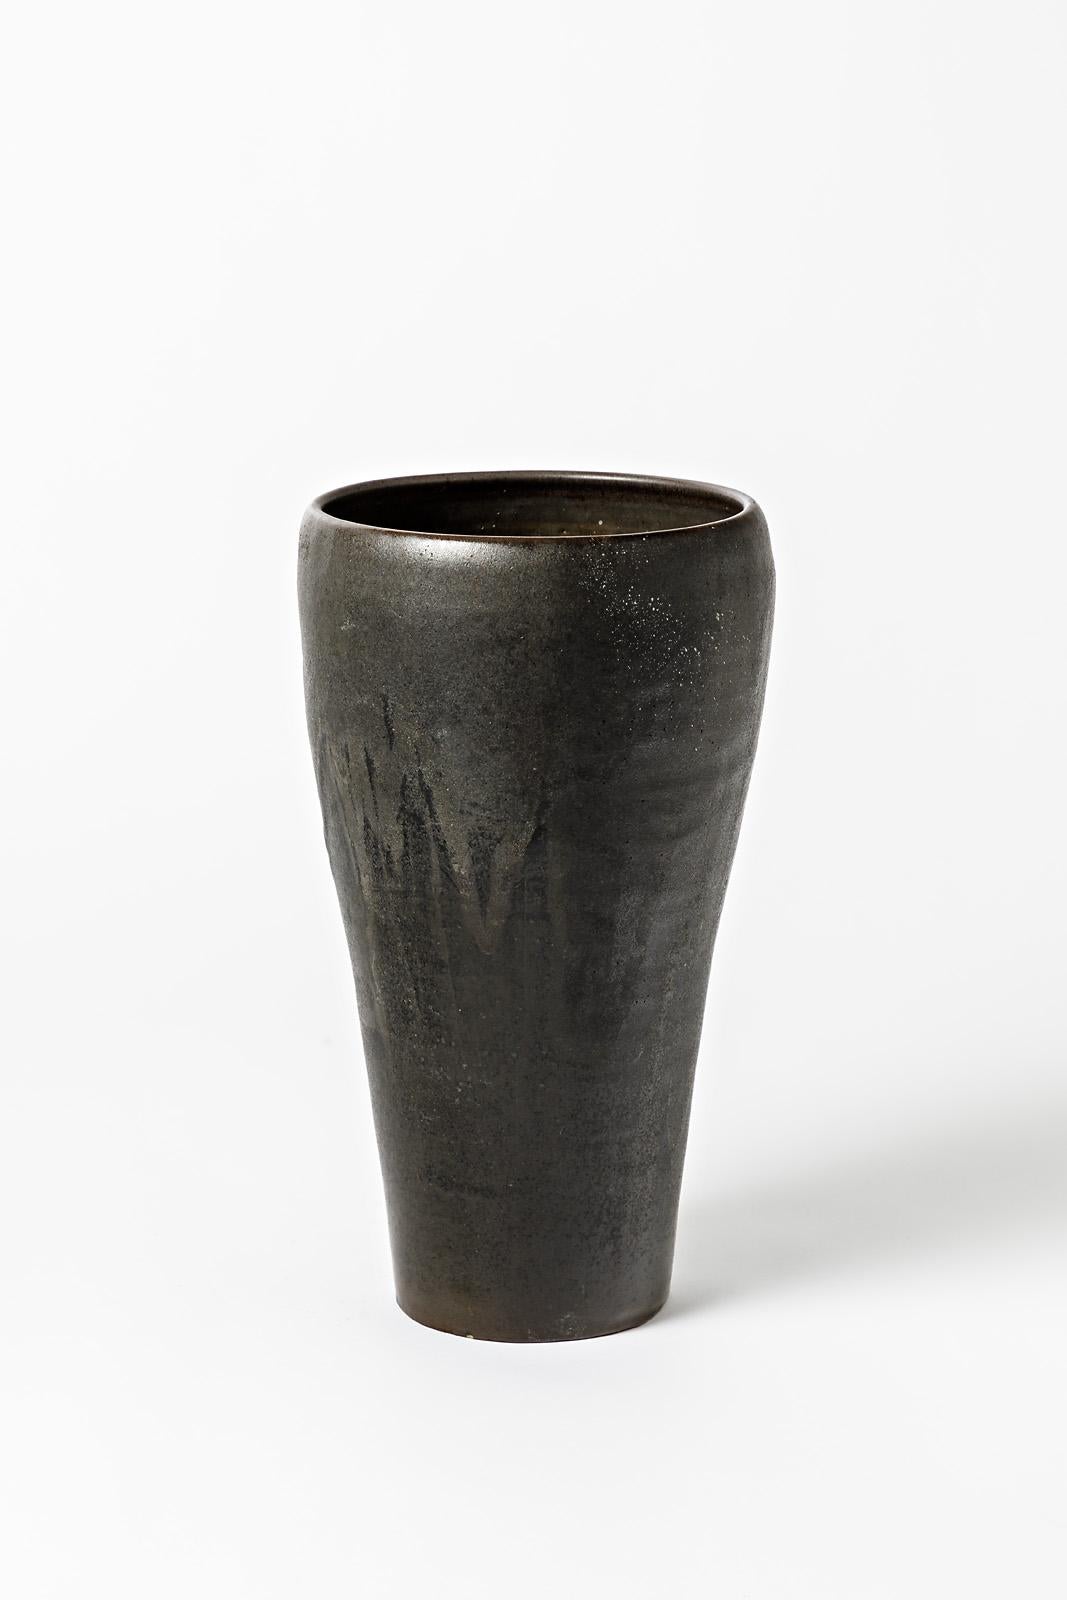 French Matt and shiny black glazed stoneware vase by Roger Jacques, circa 1960-1970. For Sale